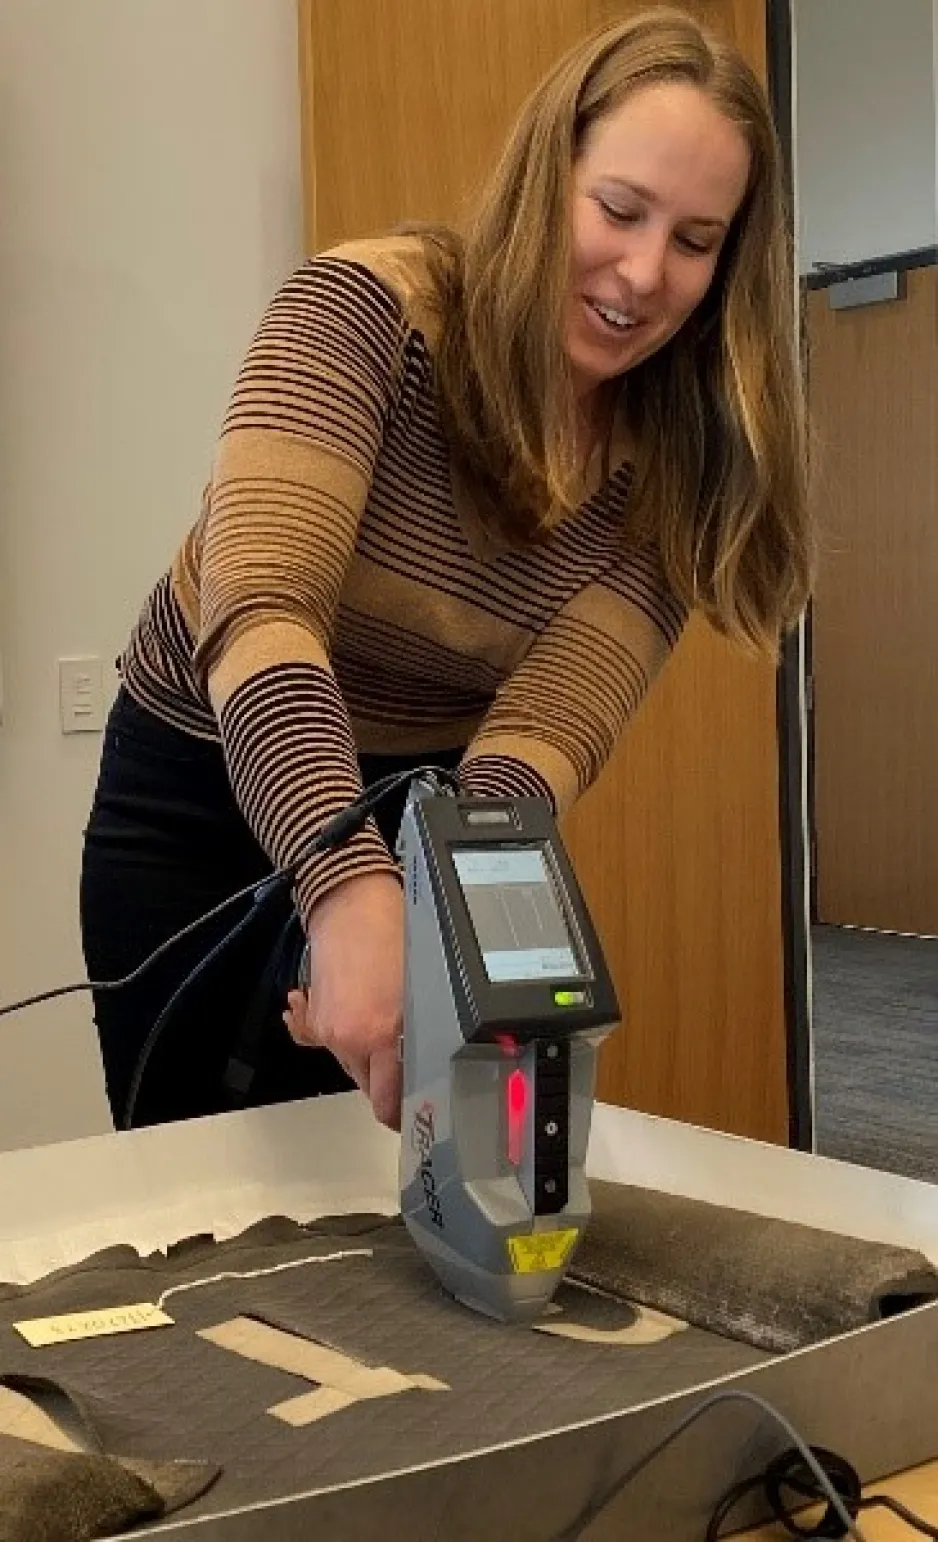 A white woman wearing a striped sweater and holding an XRF that looks like a Star Trek phaser gun. The instrument head is resting on the surface of a rolled black artifact with large white lettering, and the letter “T” is visible.